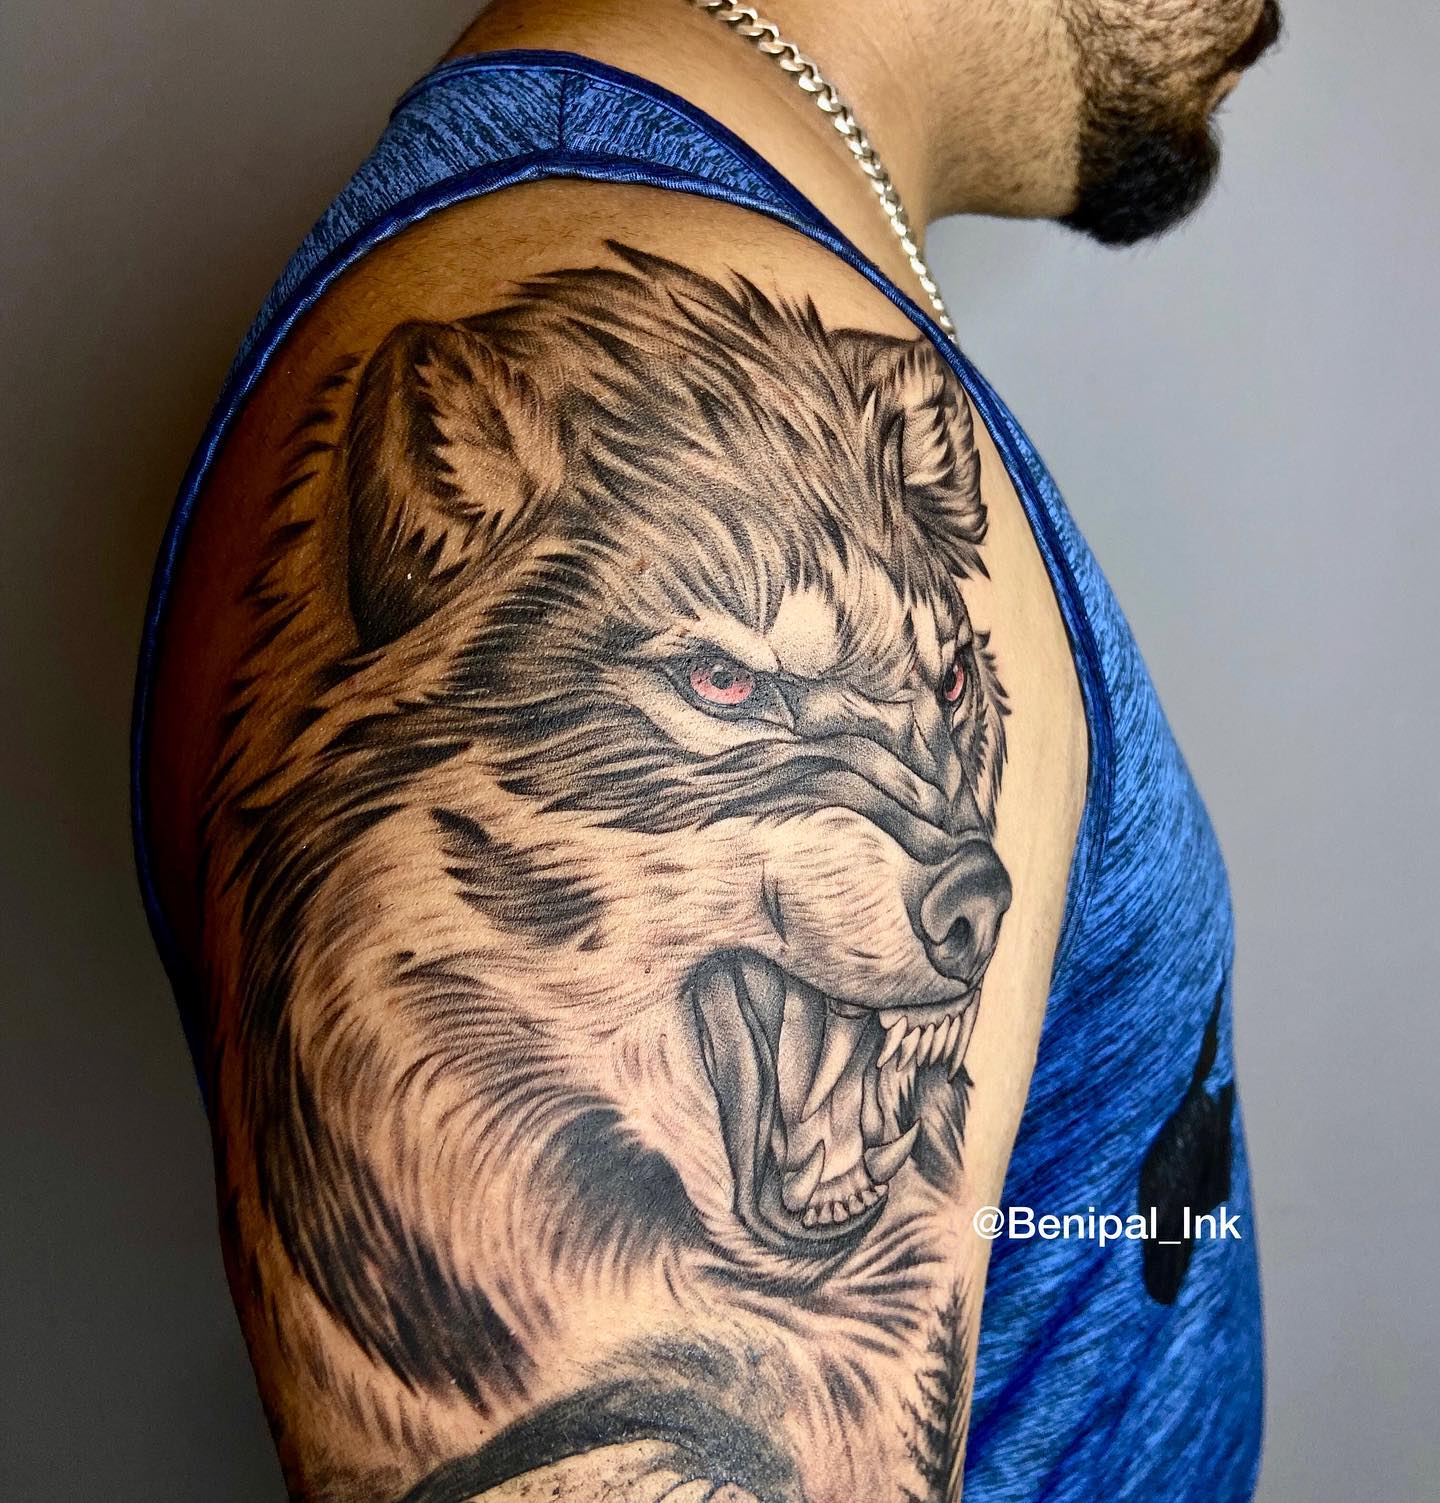 Cool wolf design that shows your bold and dominant side. Ideal for men who want to make an impression and a statement everywhere they go.